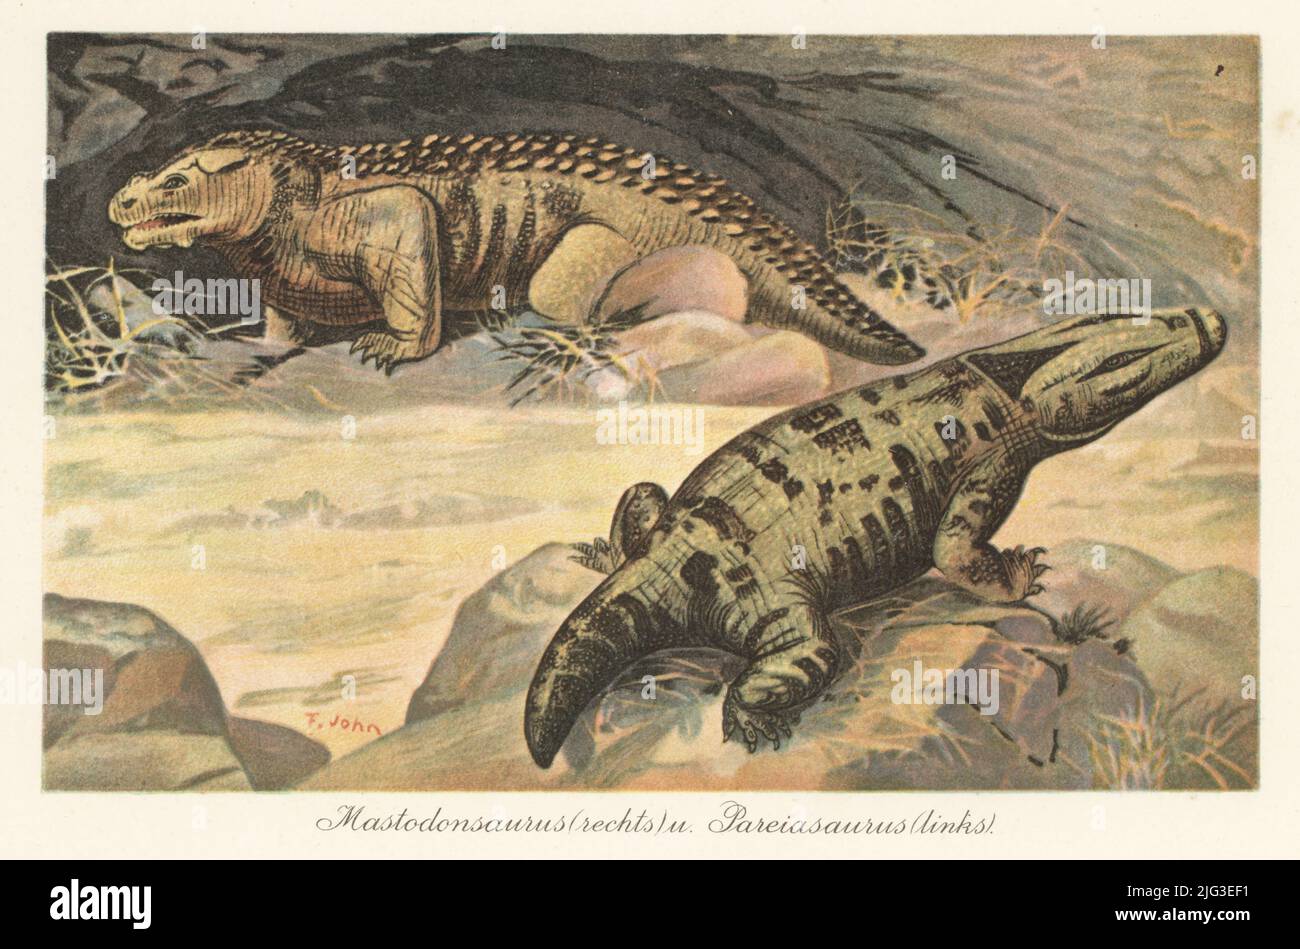 Reconstruction of a Mastodonsaurus, (right) extinct genus of giant large-headed temnospondyl amphibians of the Triassic, and Pareiasaurus, (left) extinct genus of anapsid reptile from the Permian. Colour printed illustration by F. John from Wilhelm Bolsche’s Tiere der Urwelt (Animals of the Prehistoric World), Reichardt Cocoa company, Hamburg, 1908. Stock Photo